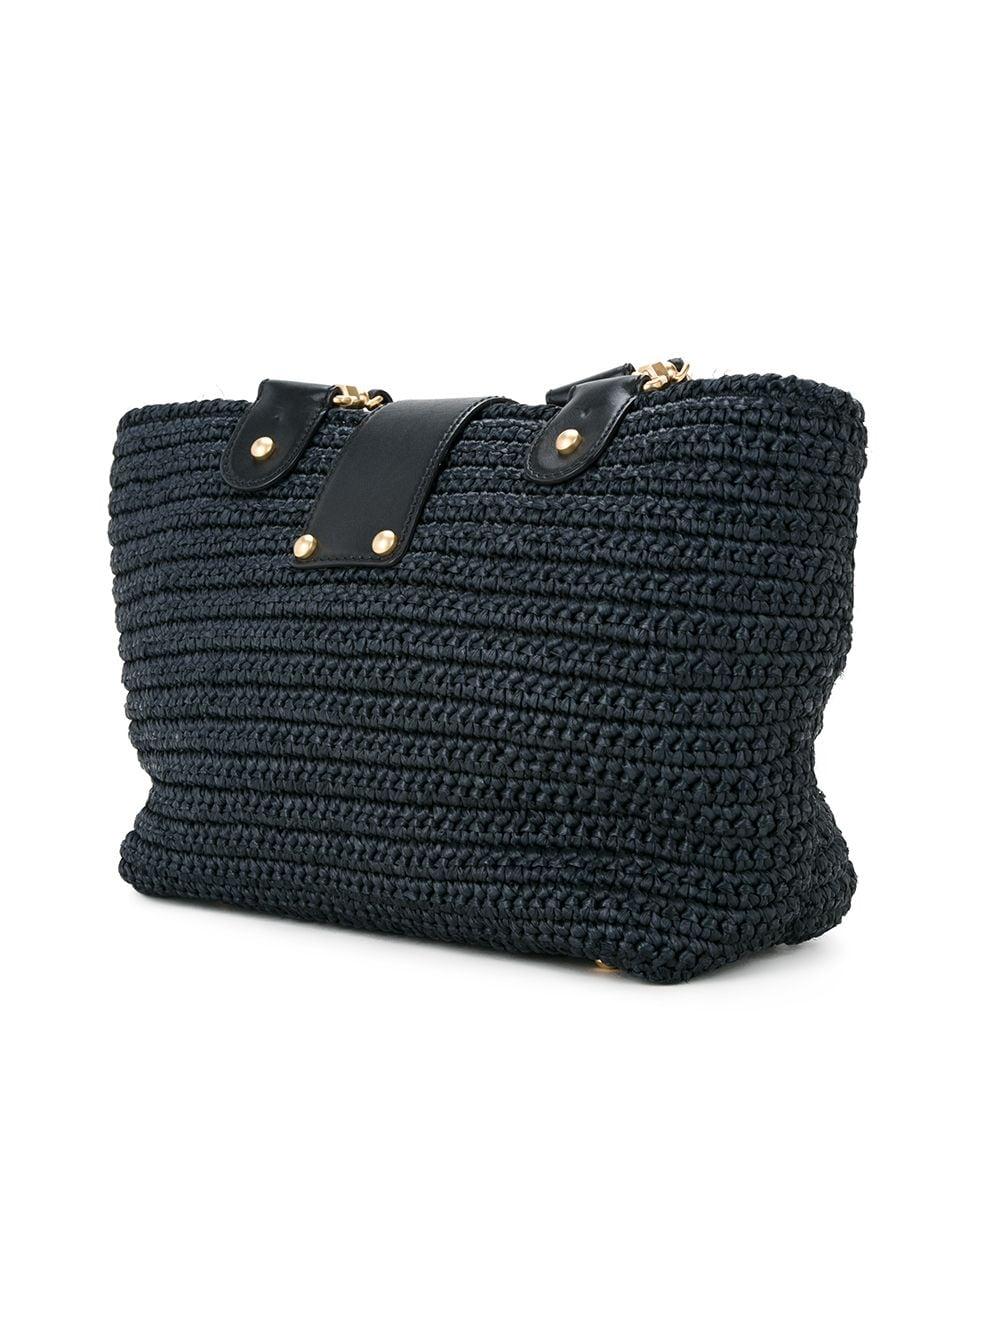 Chanel 2005 Rare Vintage Raffia Woven Black Straw and Leather Basket Tote For Sale 1